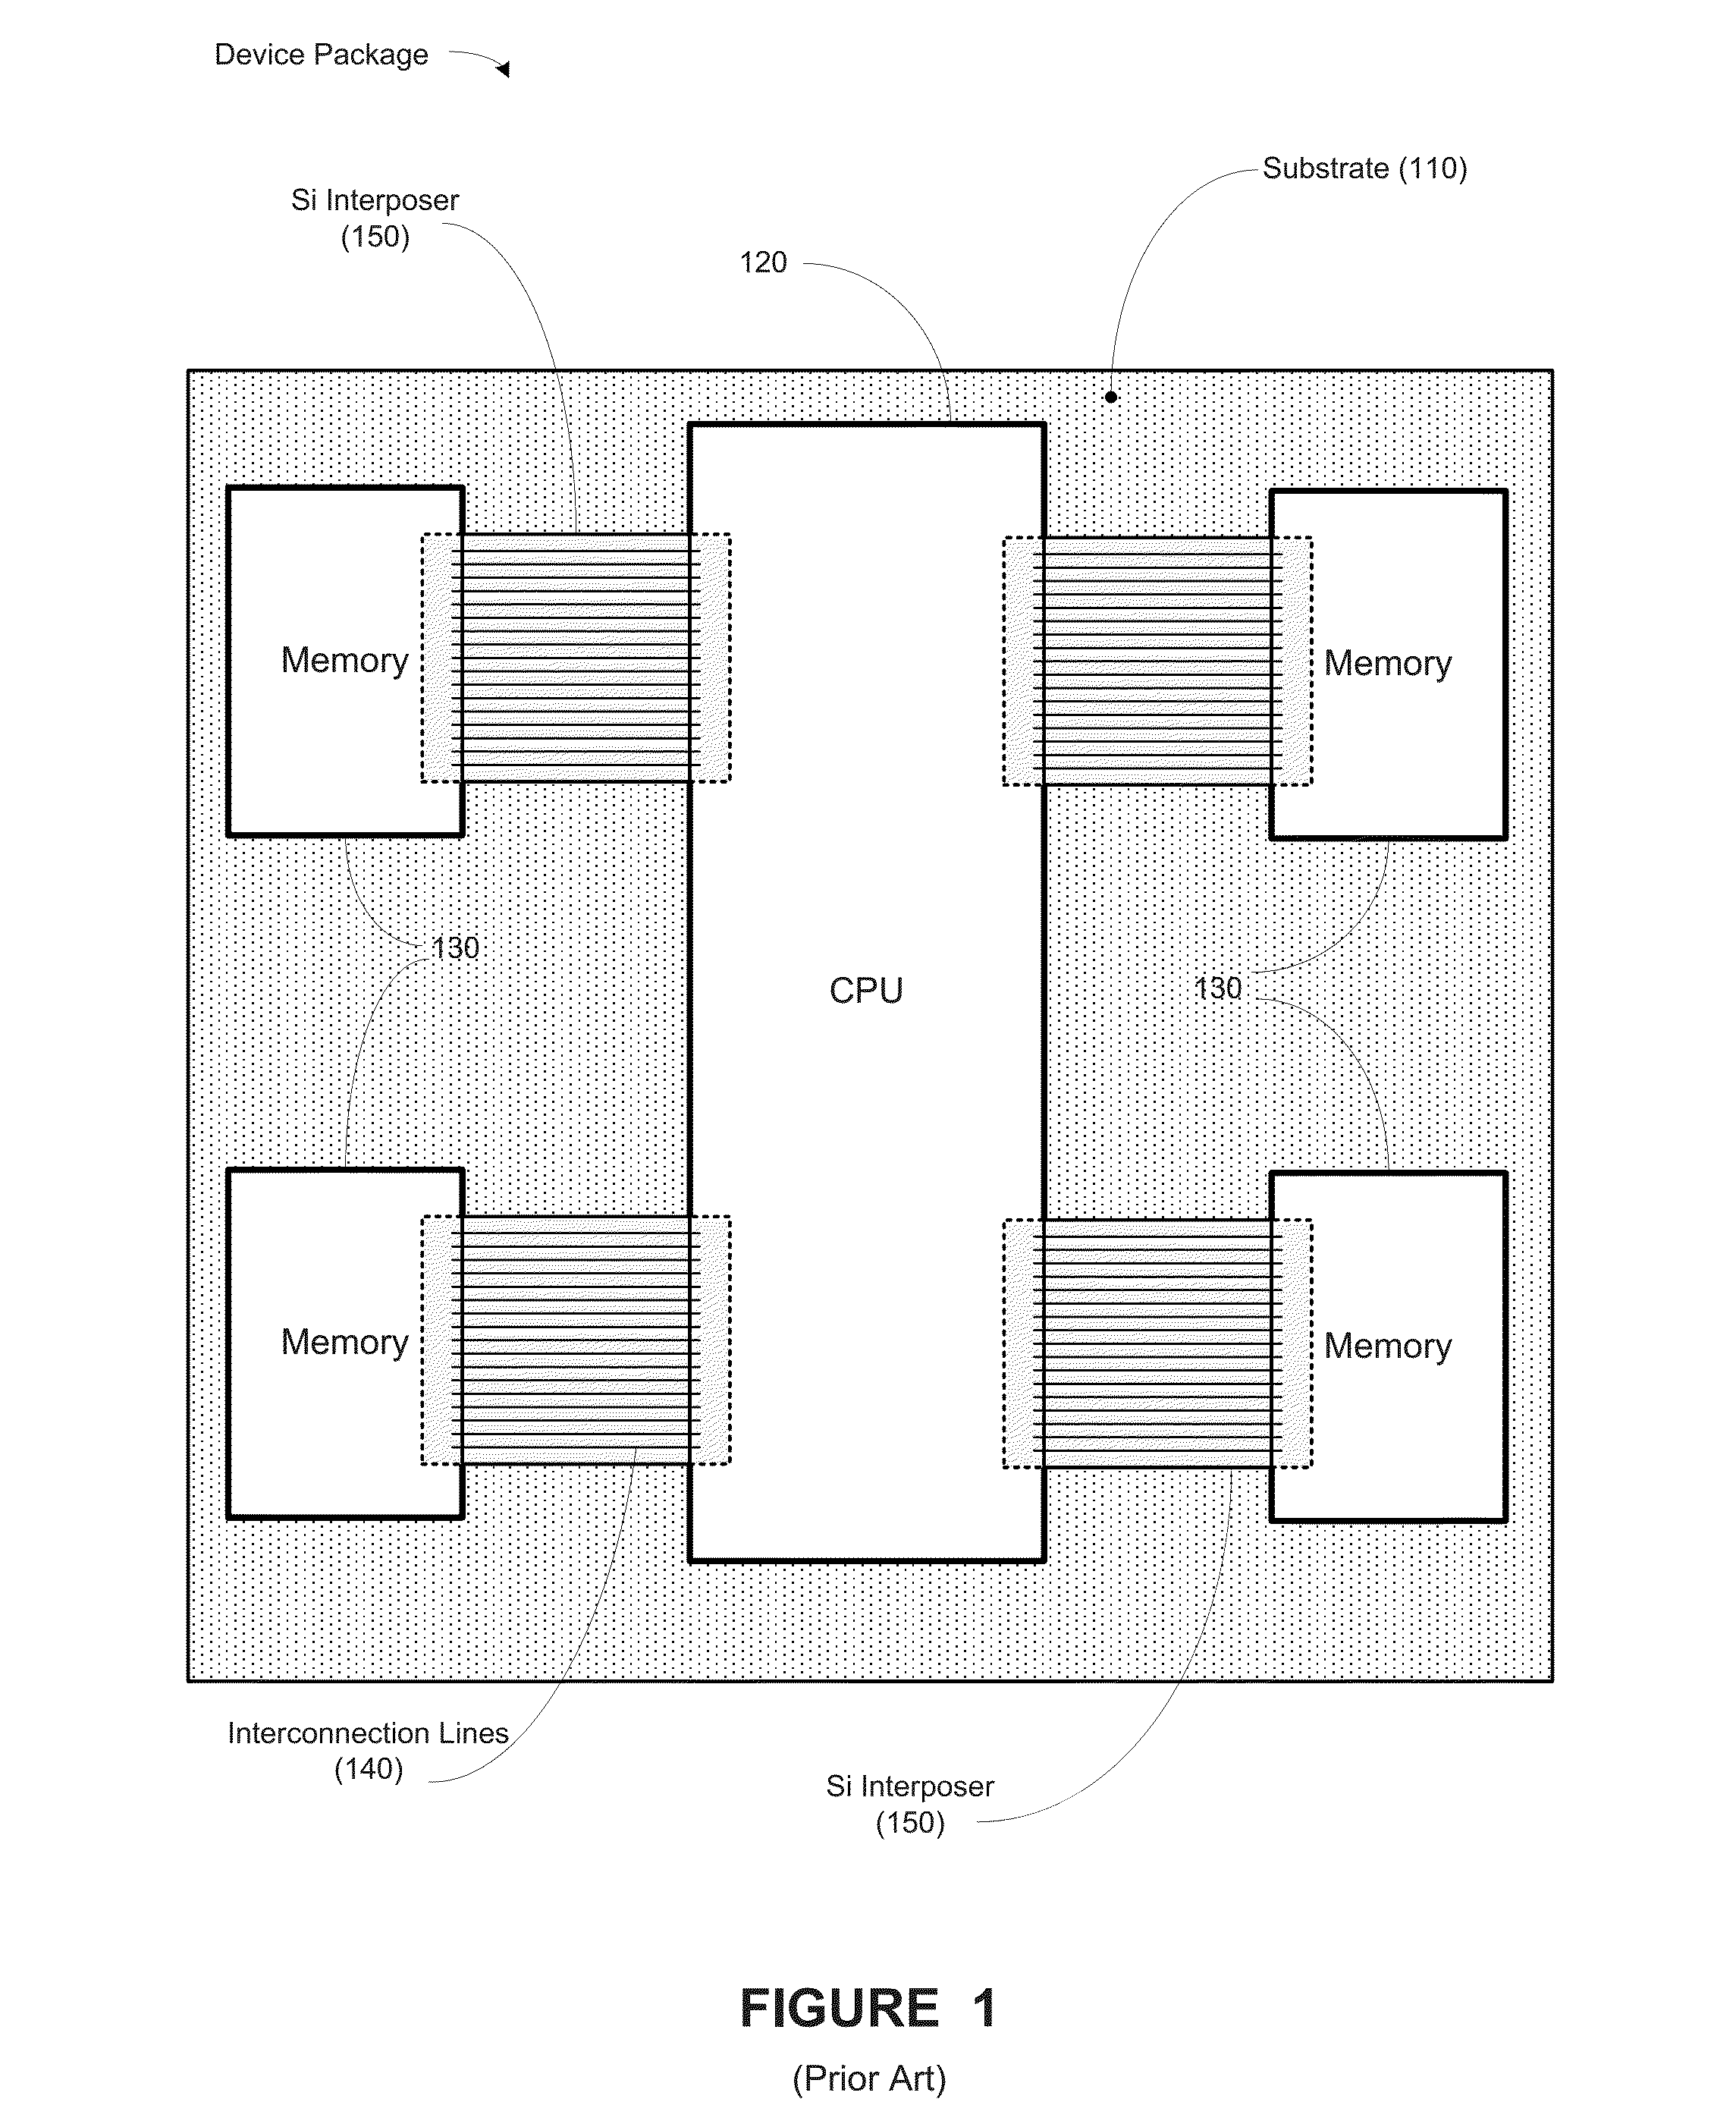 Top-side interconnection substrate for die-to-die interconnection